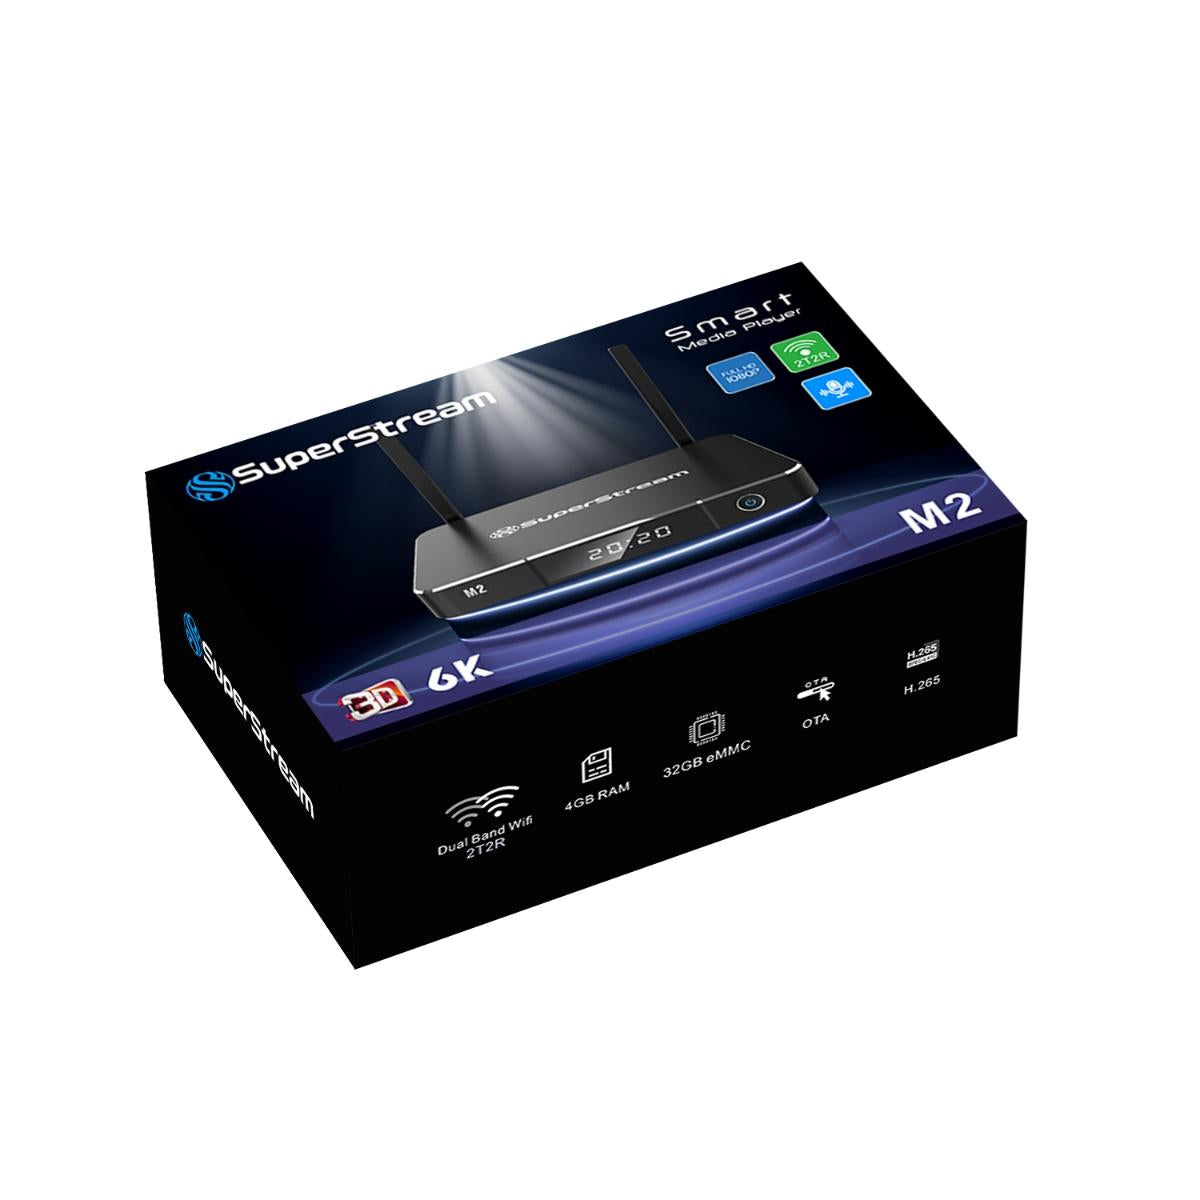 SuperStream M2 Android TV Box, Voice Control Remote, Fully Load 6K with 4Gb RAM & 64 GB Media Player Free 3 day Shipping